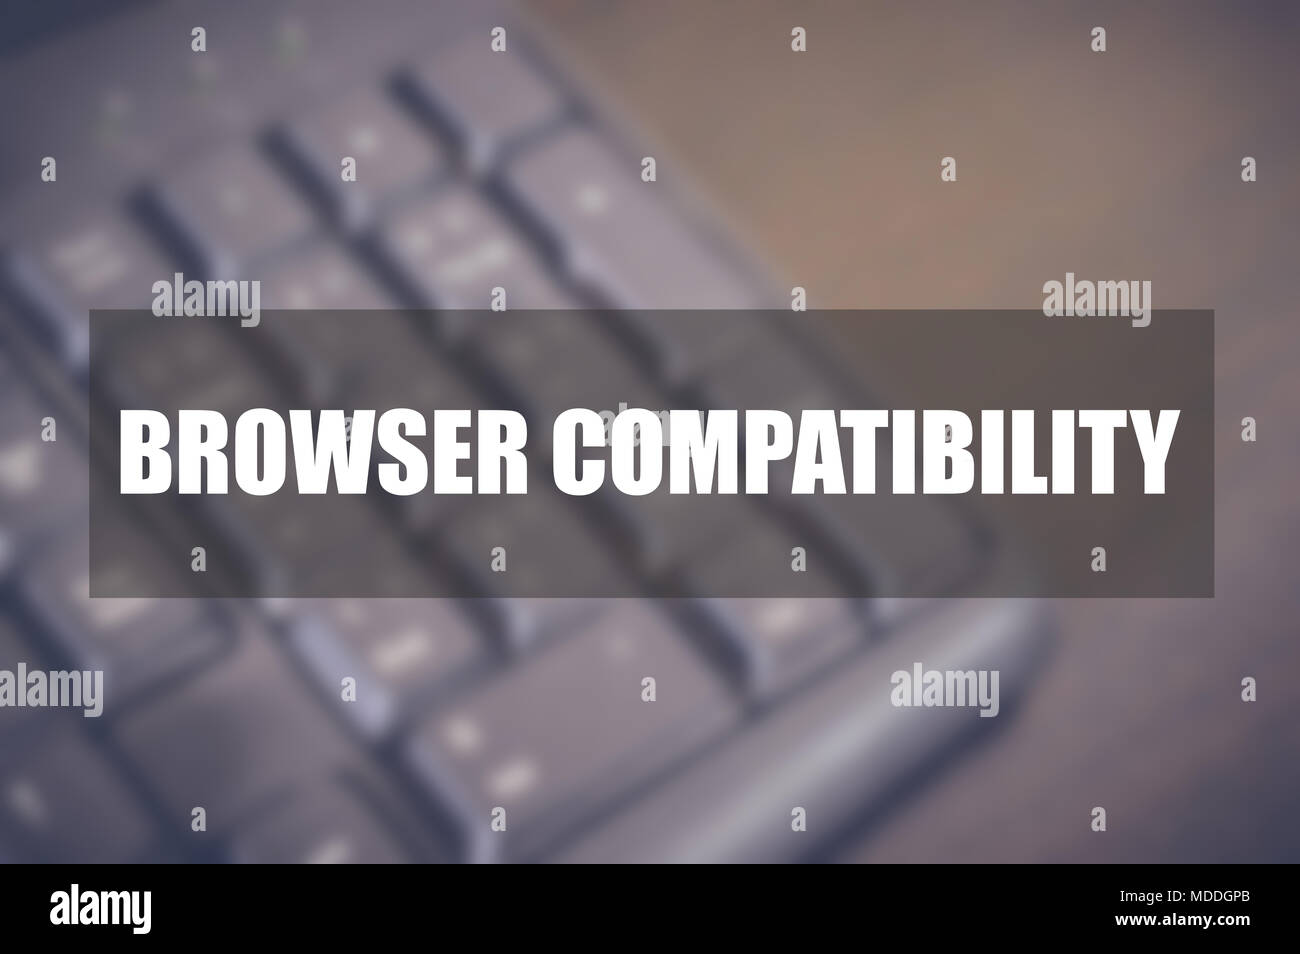 Browser compatibility word with blurring business background Stock Photo